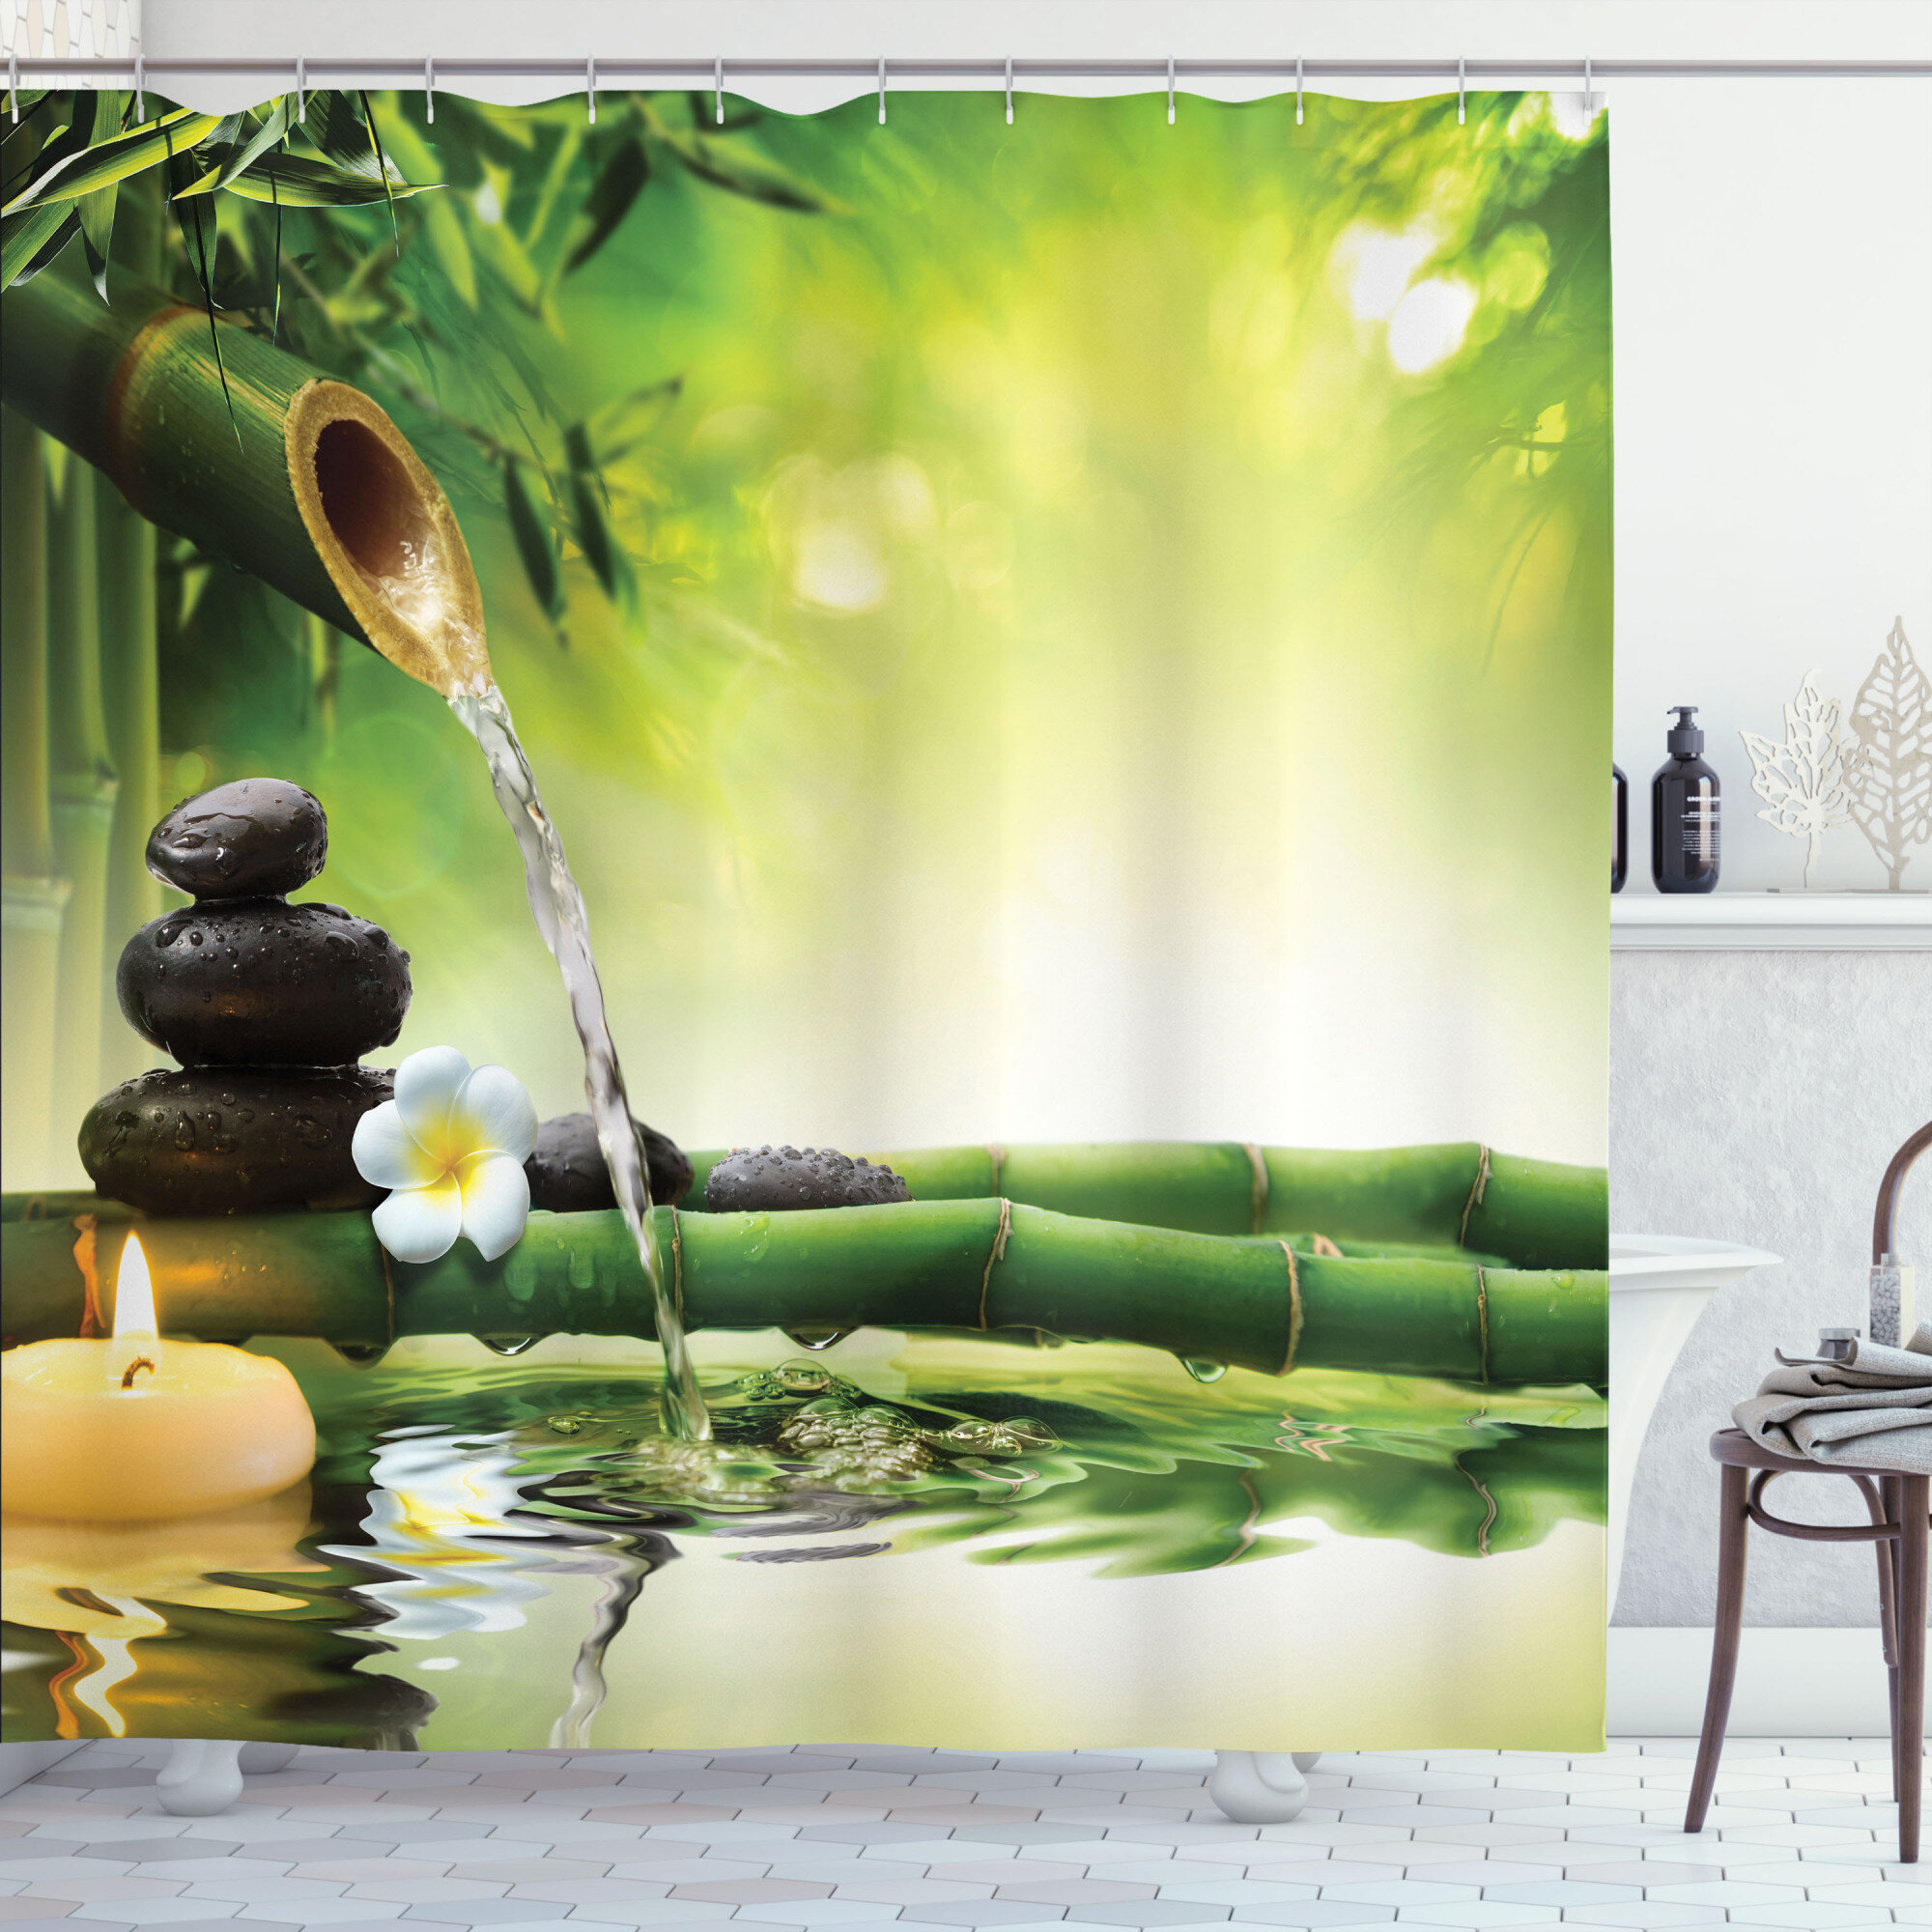 Bamboo & Waterfall Polyester Waterproof Curtains Bathroom Shower Curtains Set 